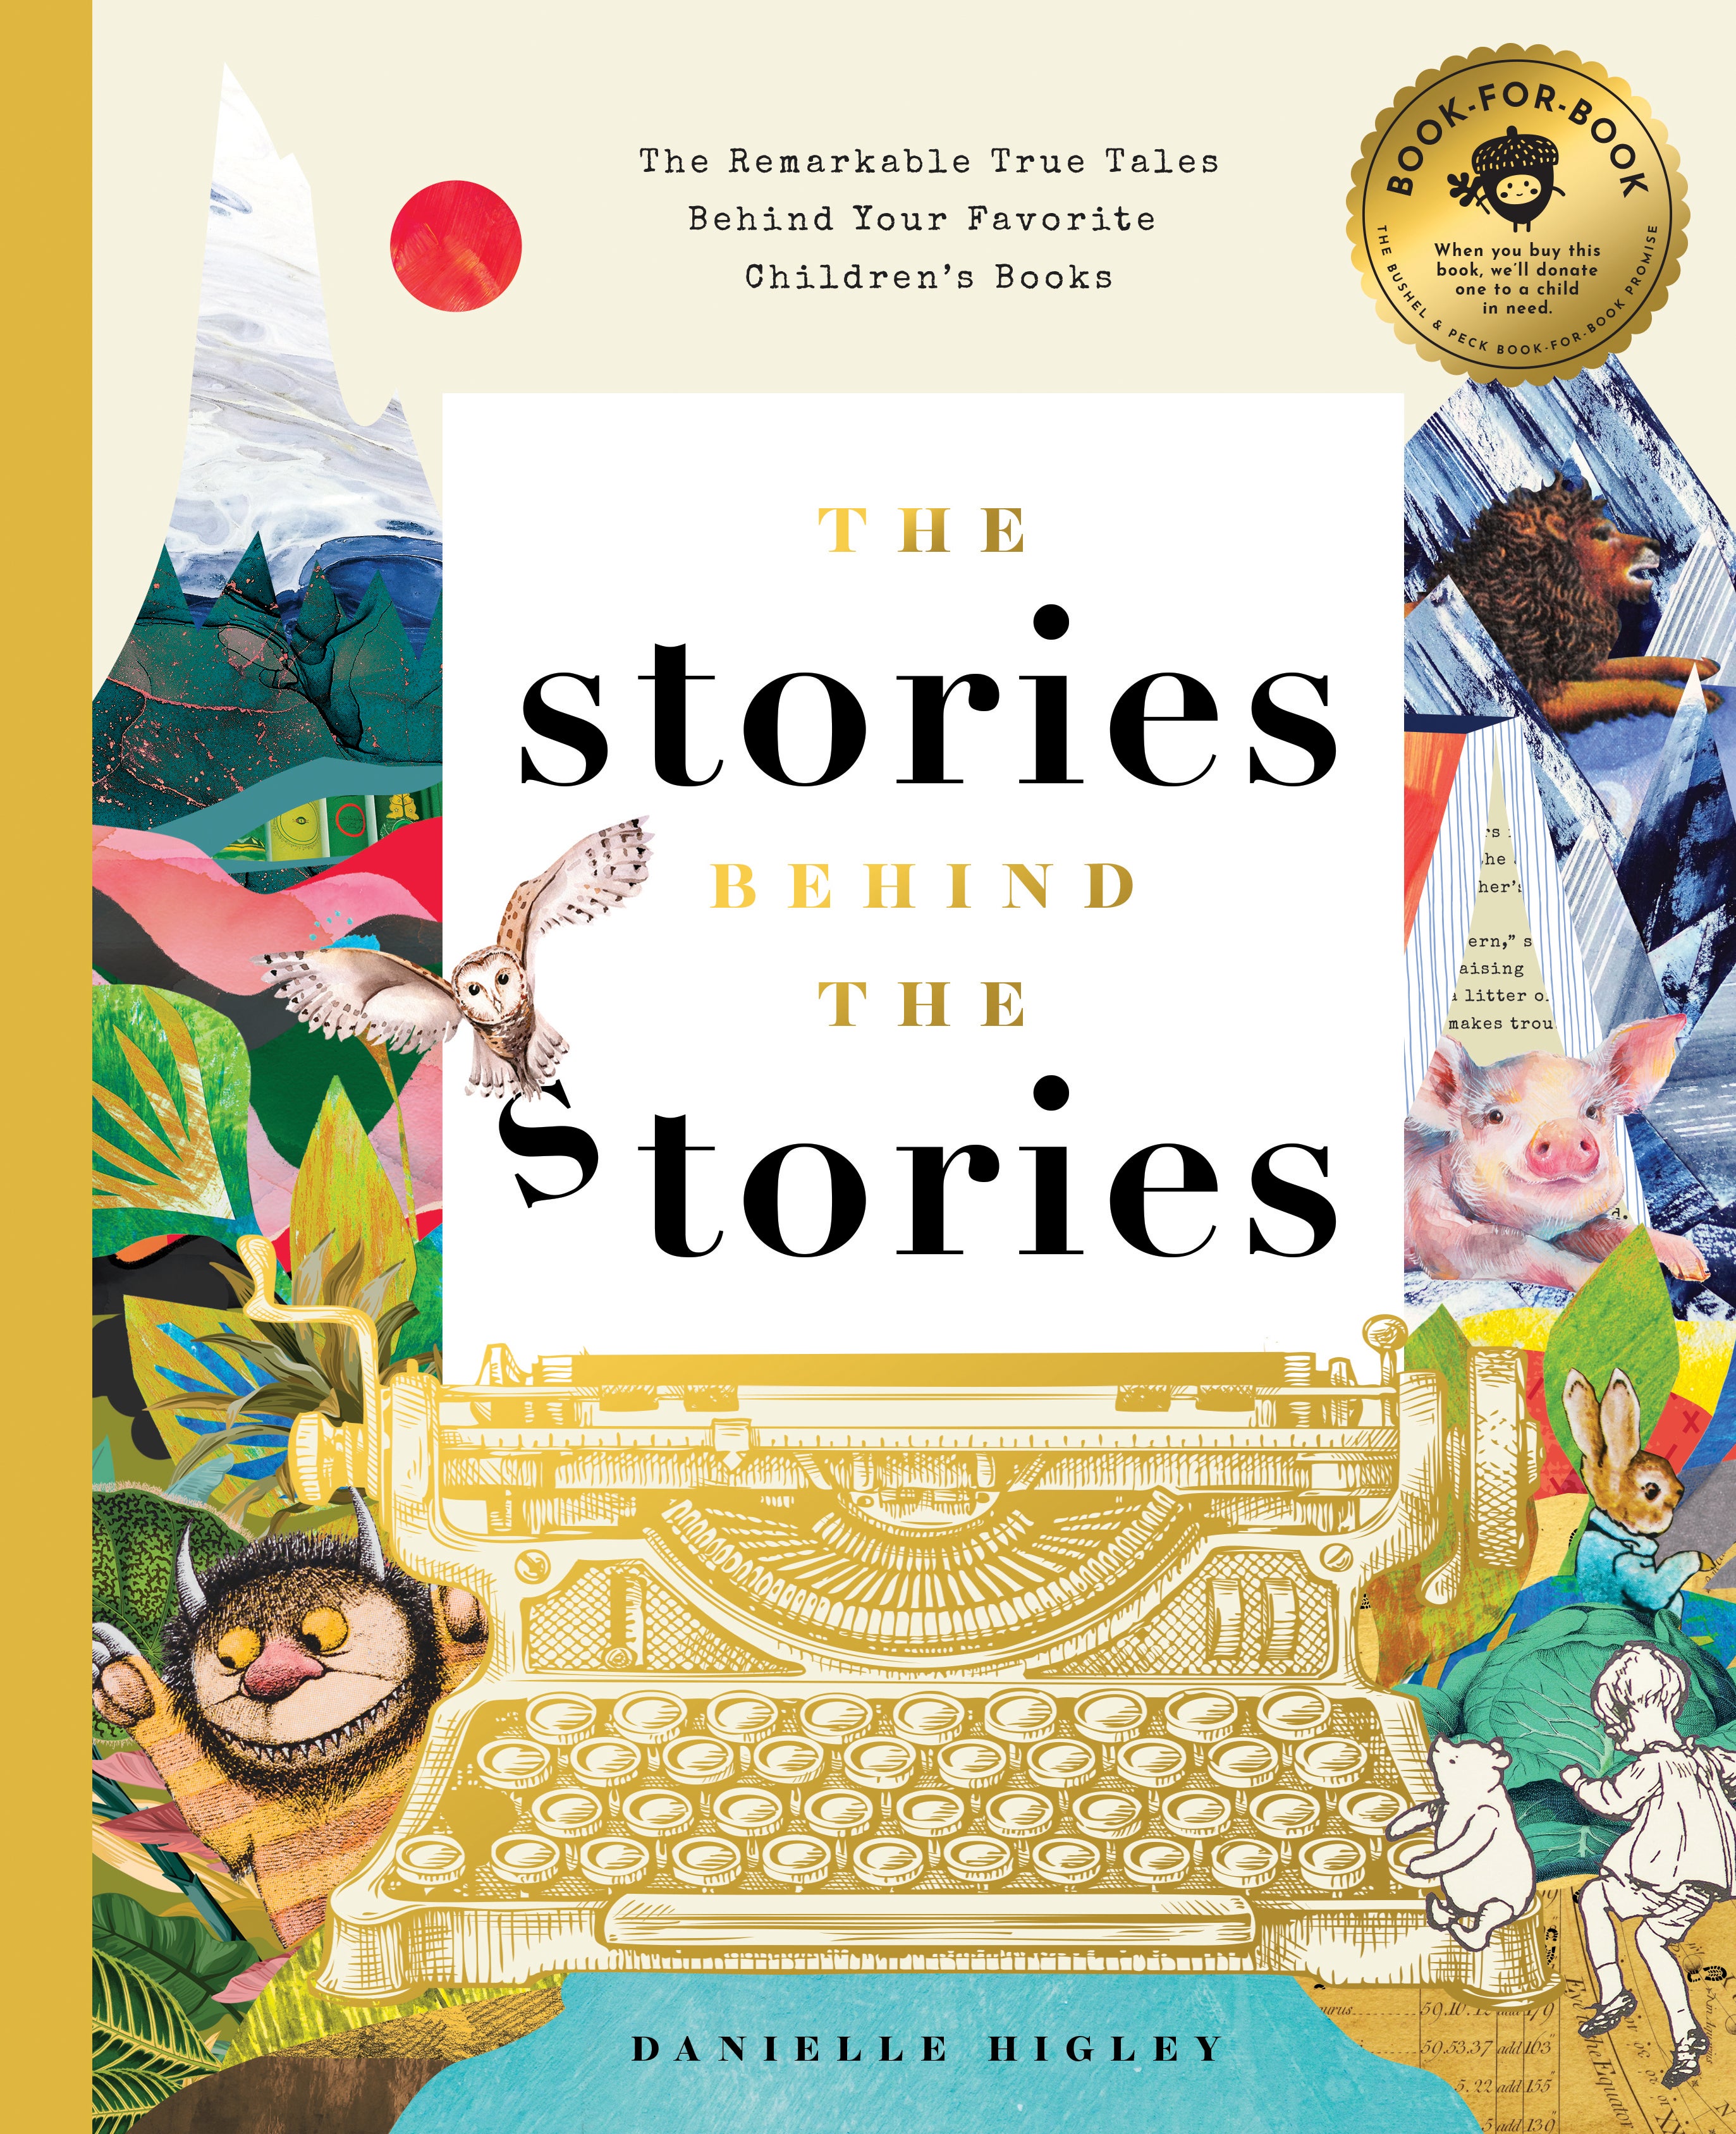 Cover art of The Stories Behind the Stories by Danielle Higley